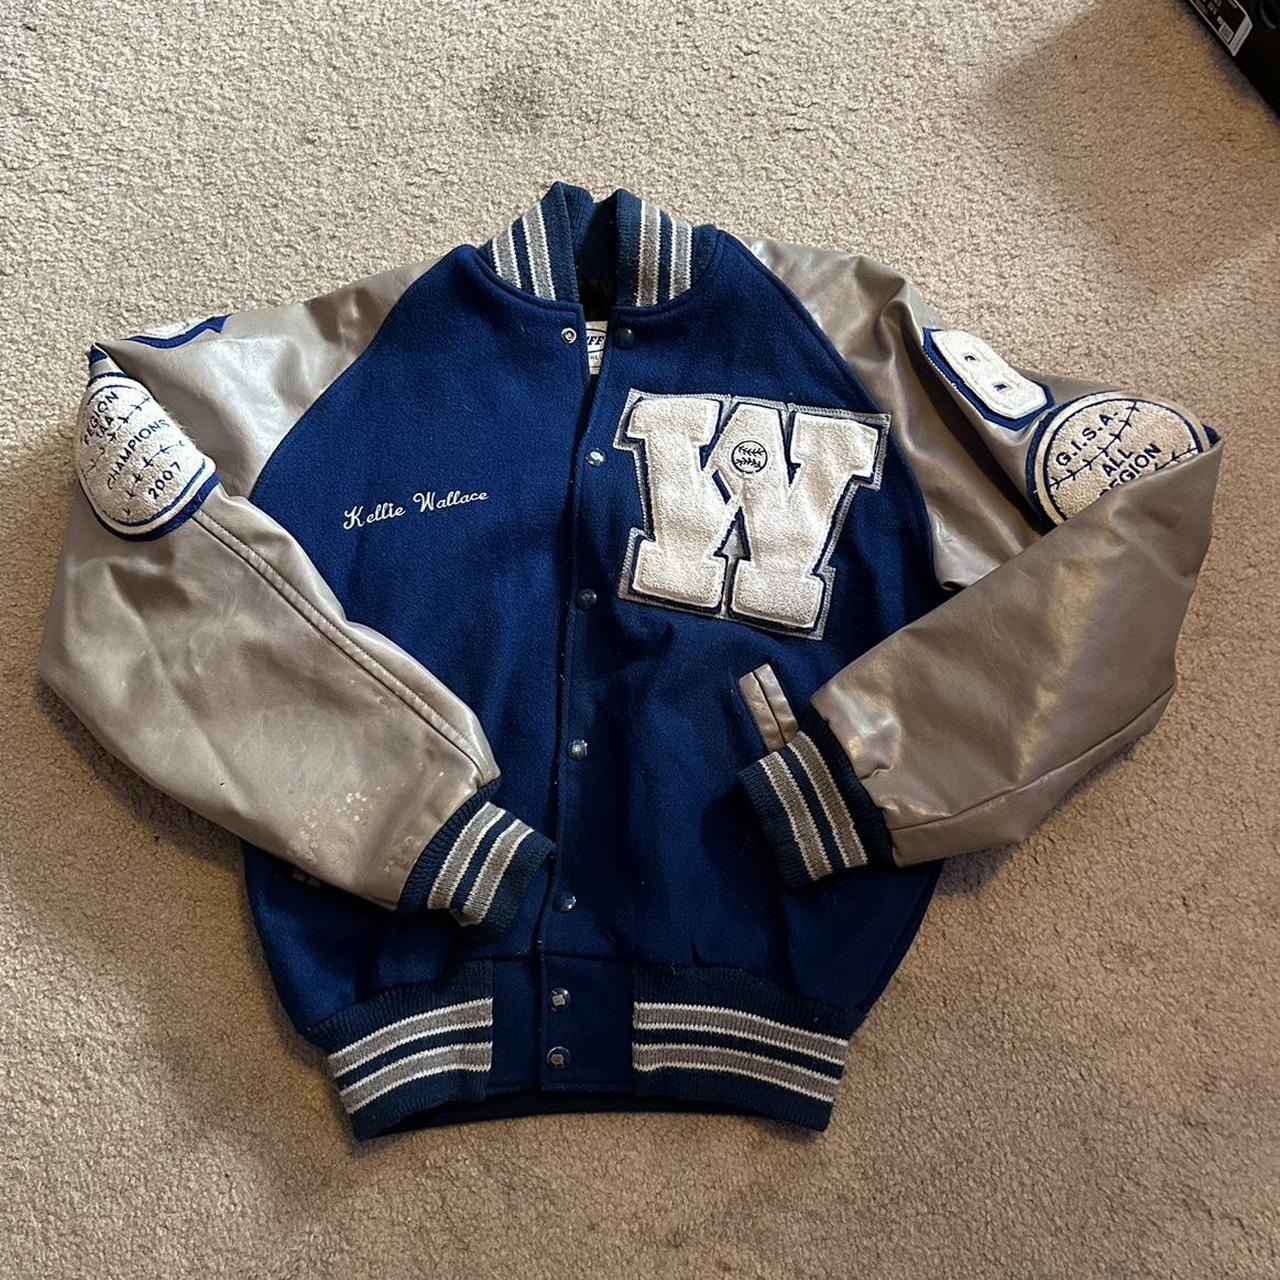 Men's White and Blue Jacket